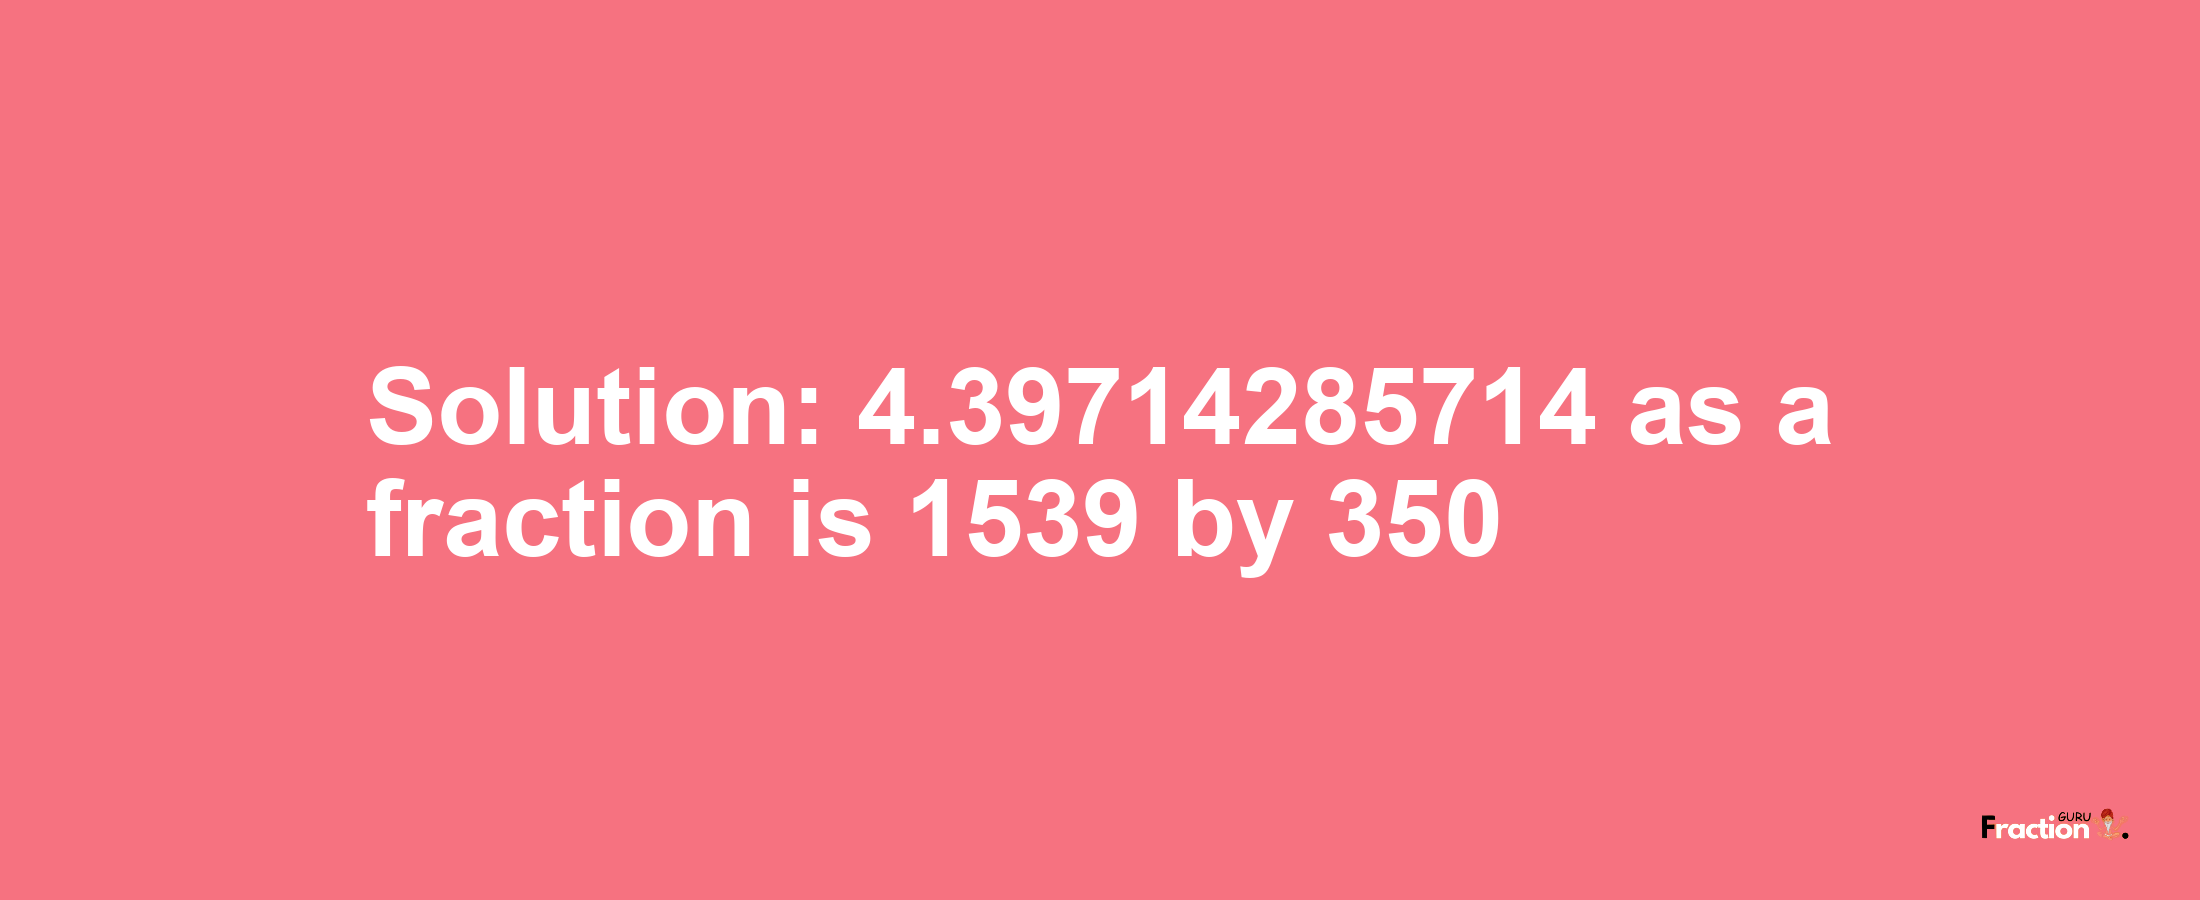 Solution:4.39714285714 as a fraction is 1539/350